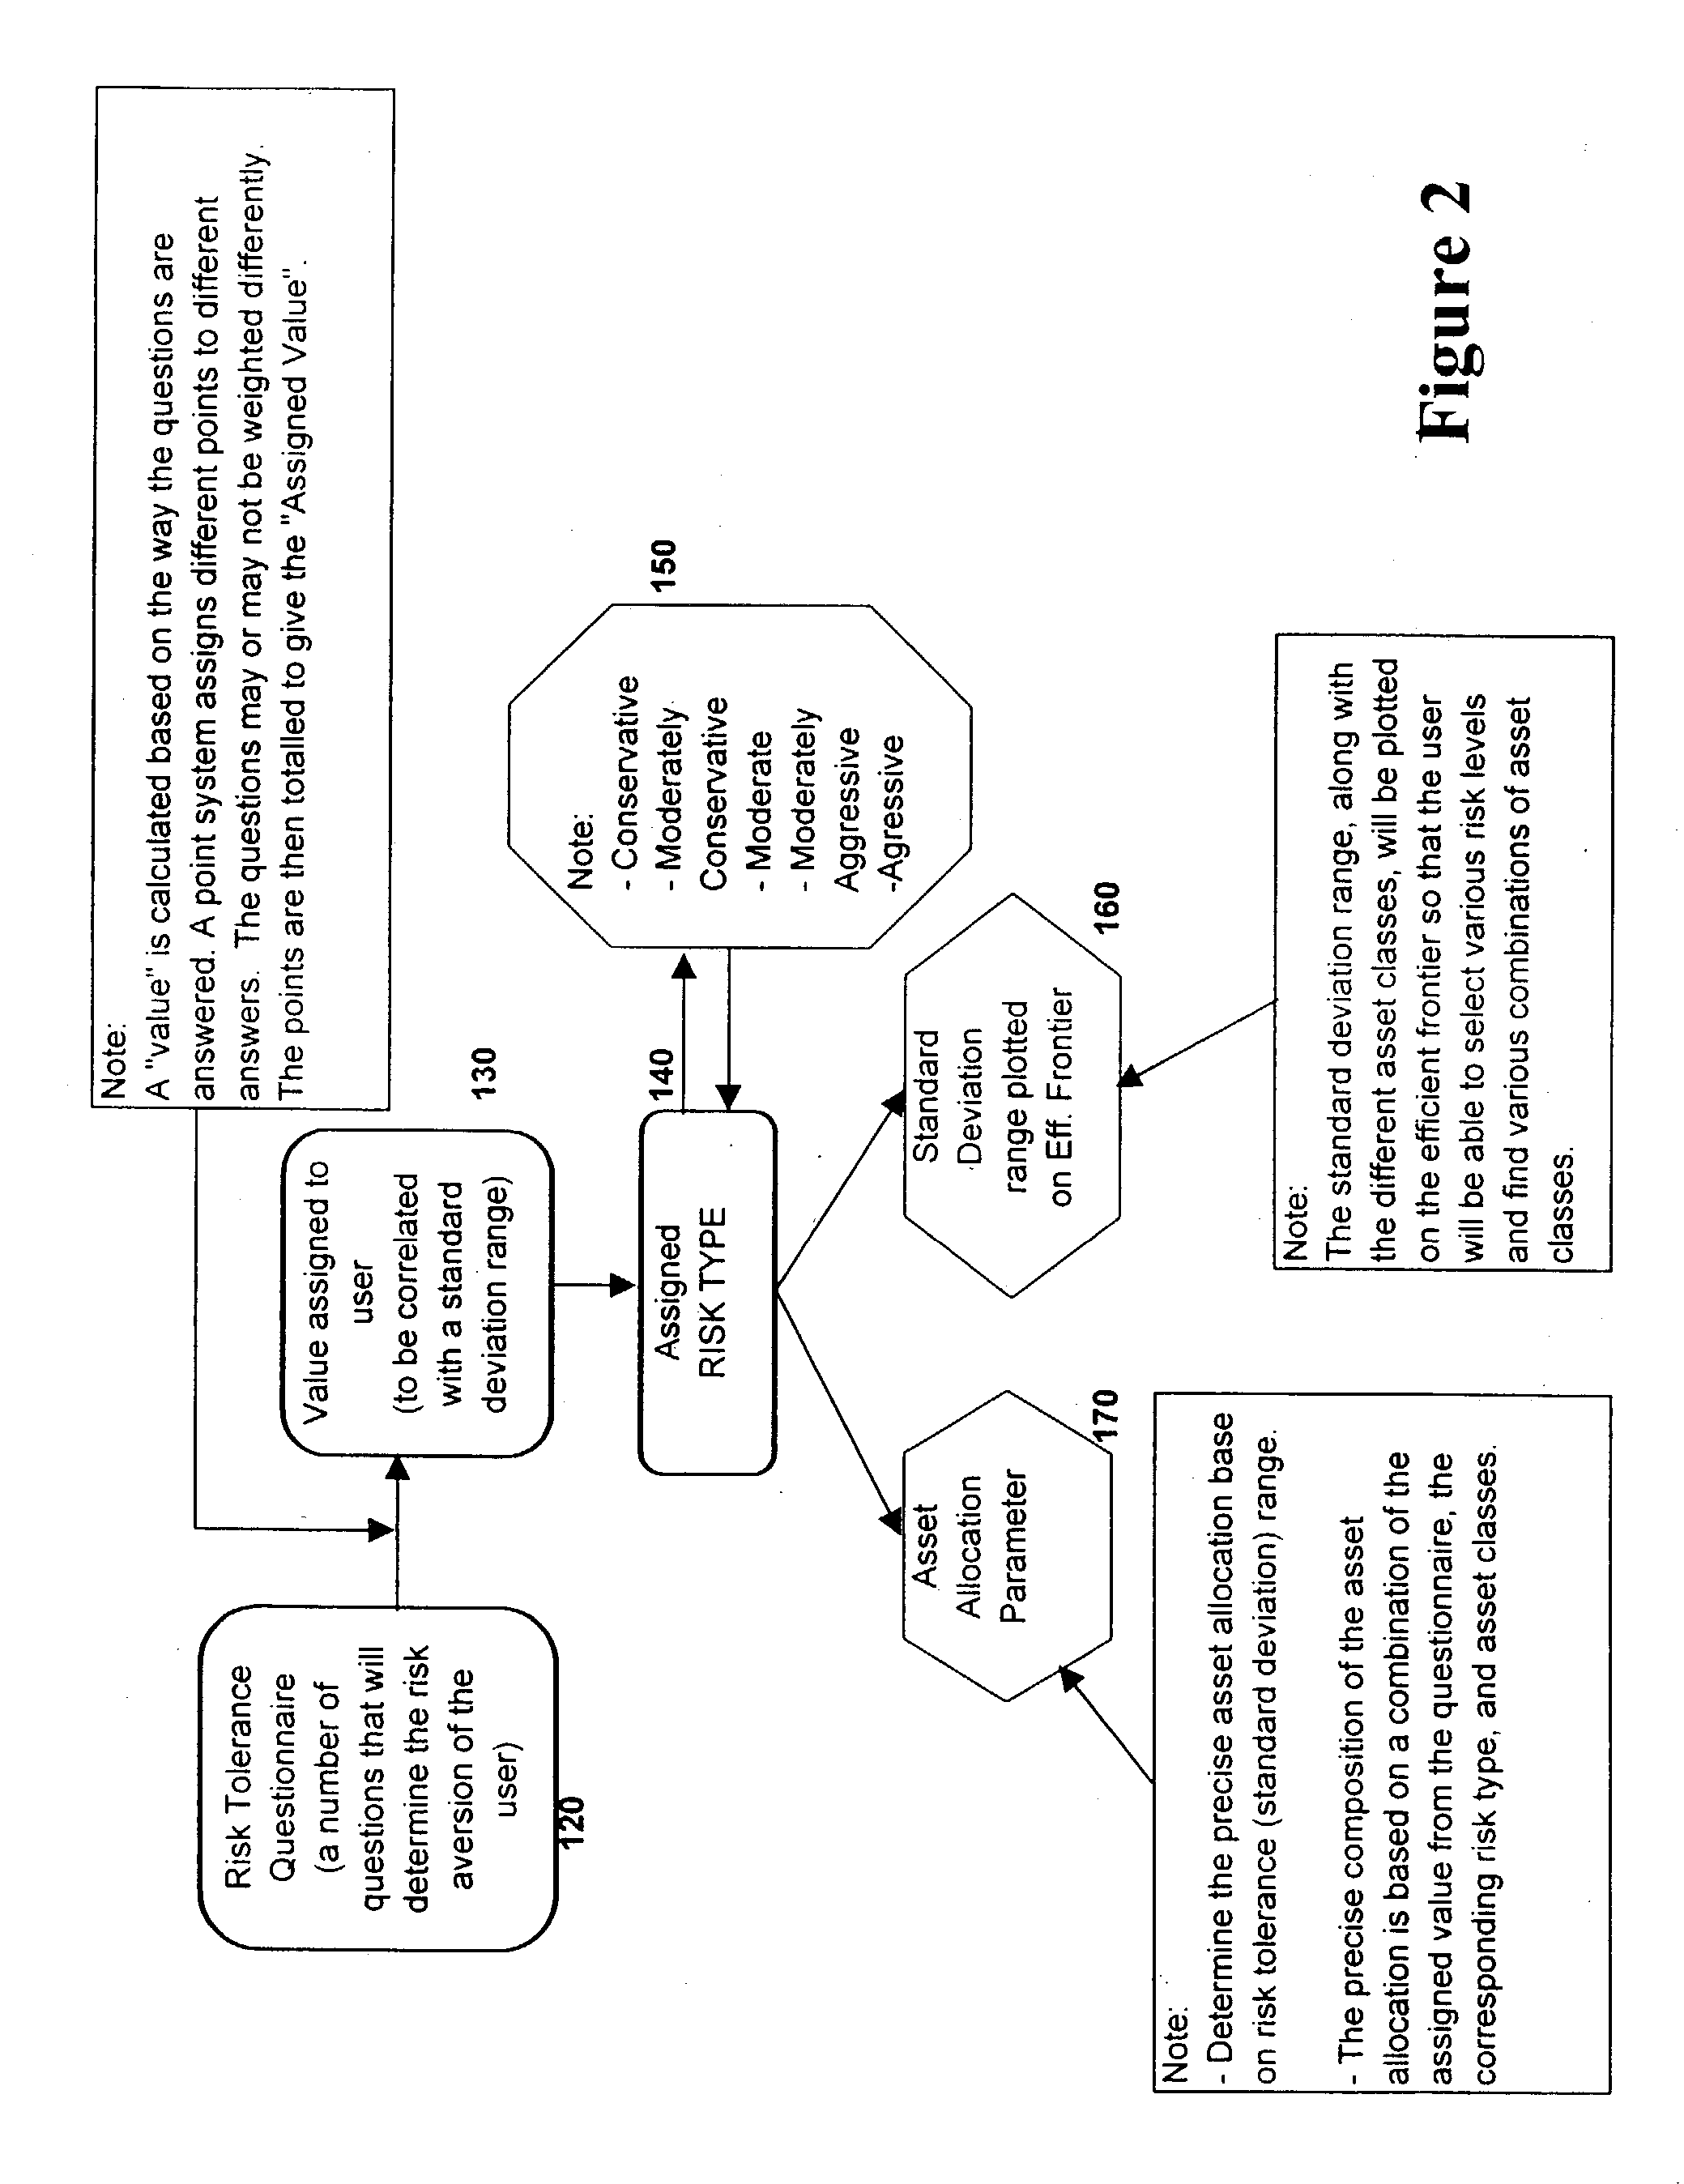 Method and apparatus for diversifying investment based on risk tolerance